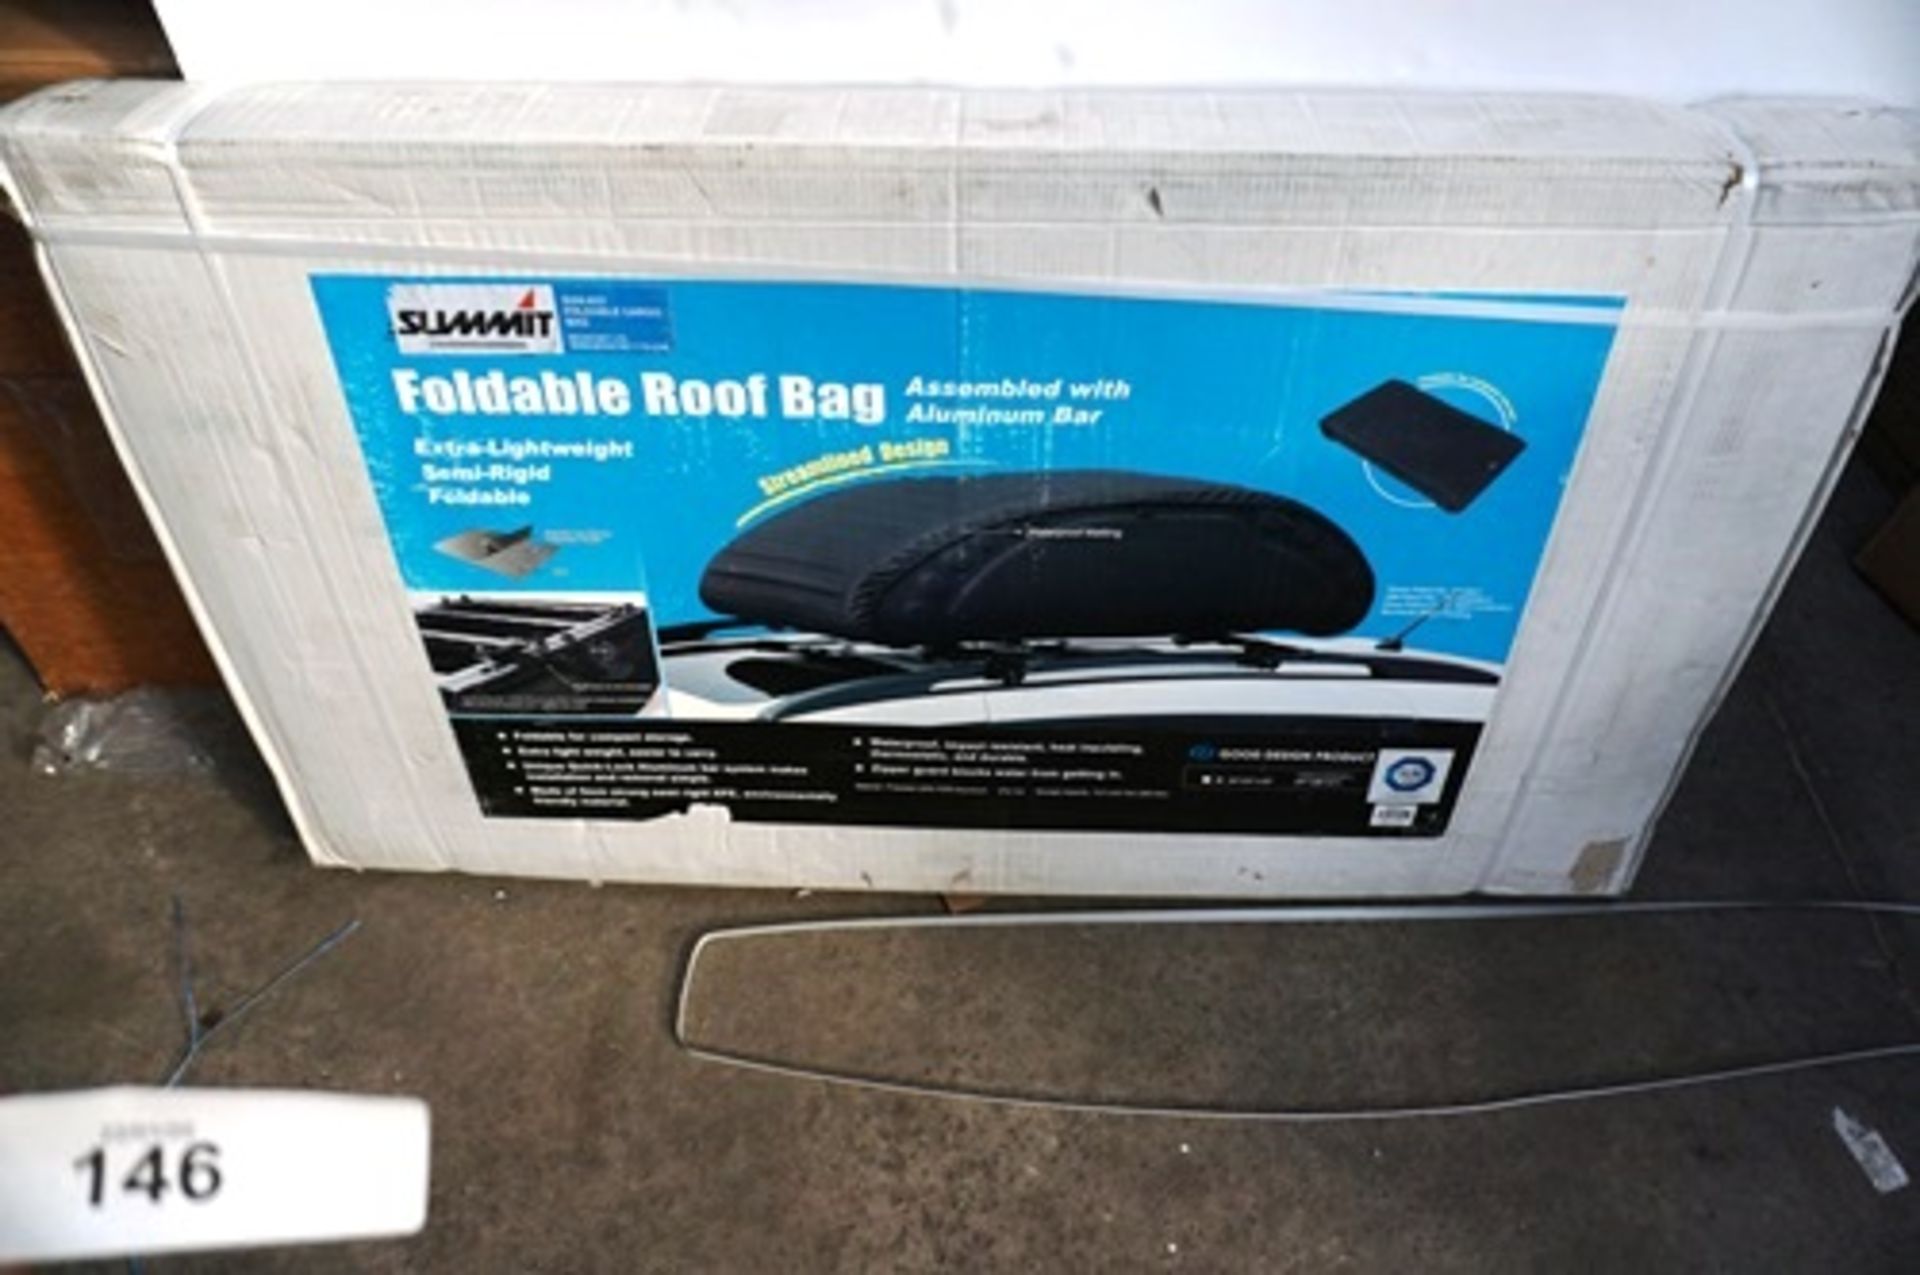 Summit fabric folding roof bag, Ref: SUM-833 - Sealed new in box (GS1)